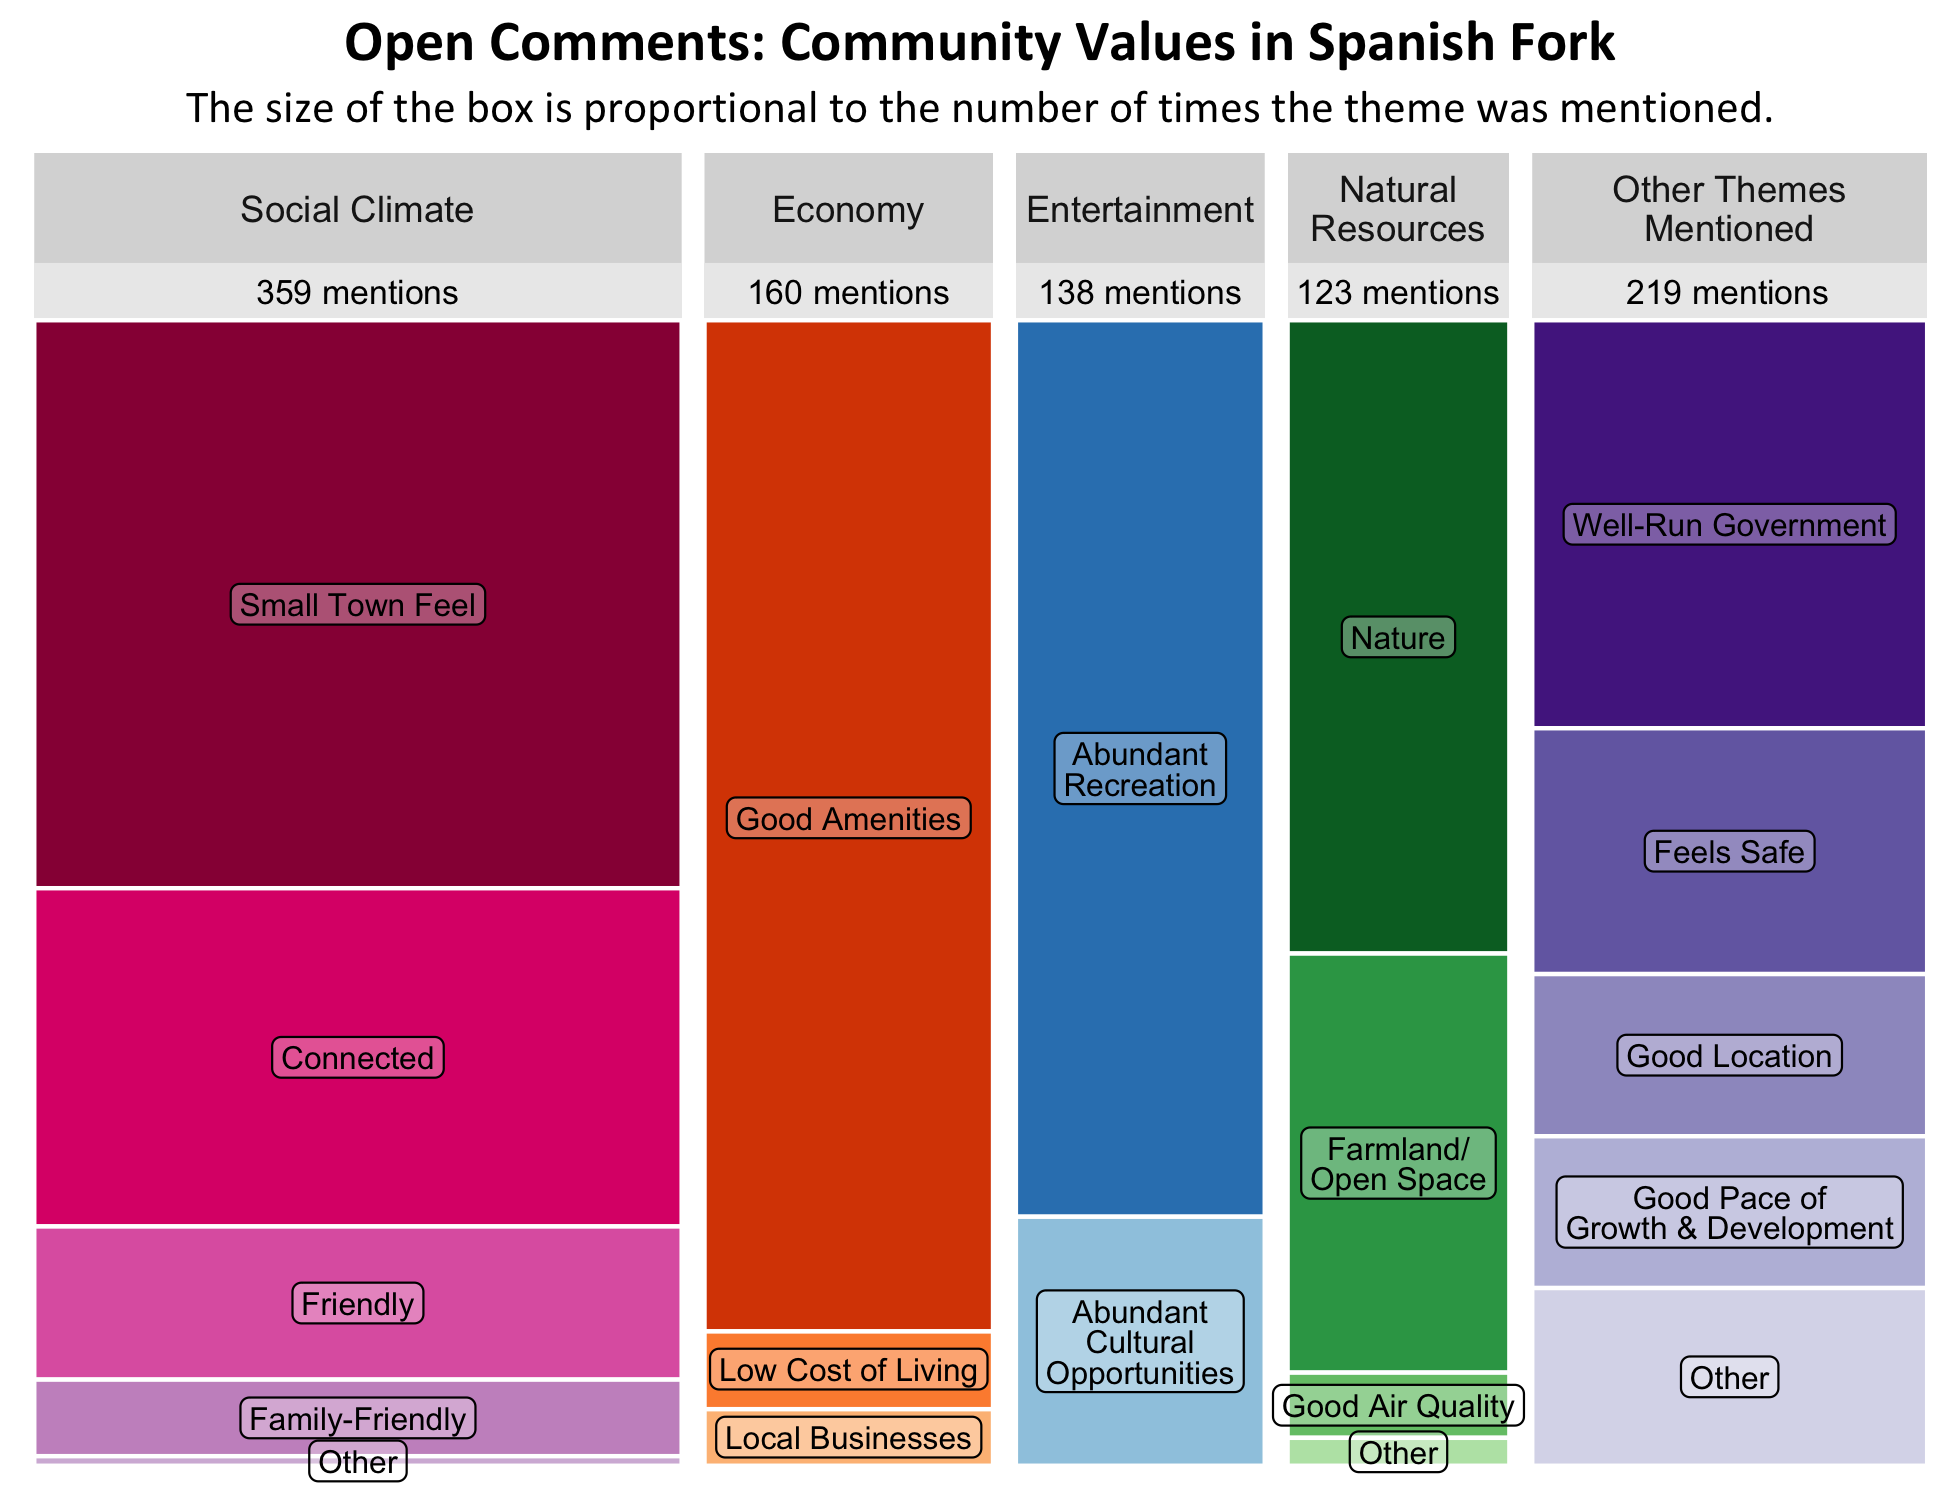 Type: Treemap Chart. Title: Open Comments: Community Values in Spanish Fork. Subtitle: The size of the box is proportional to the number of times the theme was mentioned. Data –Category: Social Climate- 359 mentions, boxes largest to smallest include Small-Town feel, Connected, Friendly, Family-Friendly, Other. Category: Natural Resources- 123 Mentions, boxes largest to smallest include Nature, Farmland/ Open Space, Good air Quality, Other. Category: Economy- 160 mentions- Good Amenities, Low Cost of Living, Local Businesses. Category: Entertainment- 138 Mentions- Abundant Recreation, Abundant Cultural Opportunities, Category: Other Themes Mentioned- 219 mentions, boxes largest to smallest Includes Well-Run Government, Feels Safe, Good Location, Good Pace of Growth and Development, Other. 